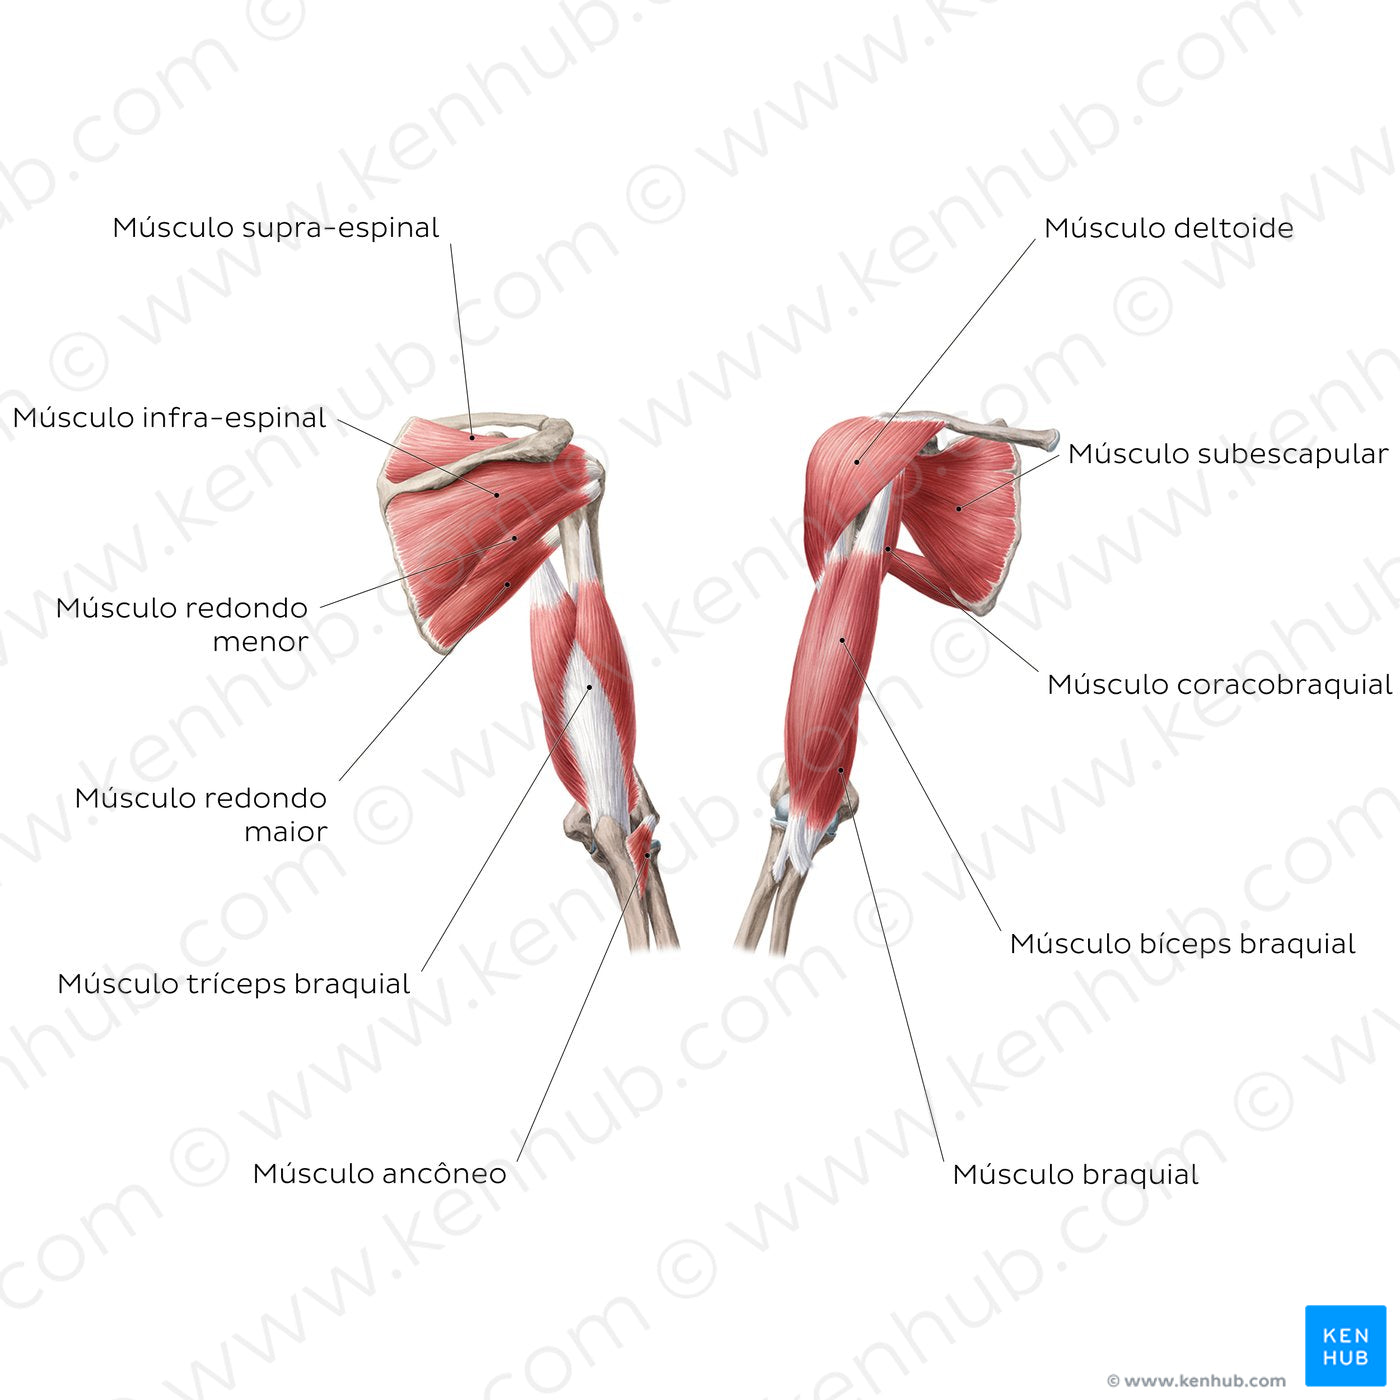 Muscles of the arm and shoulder (Portuguese)